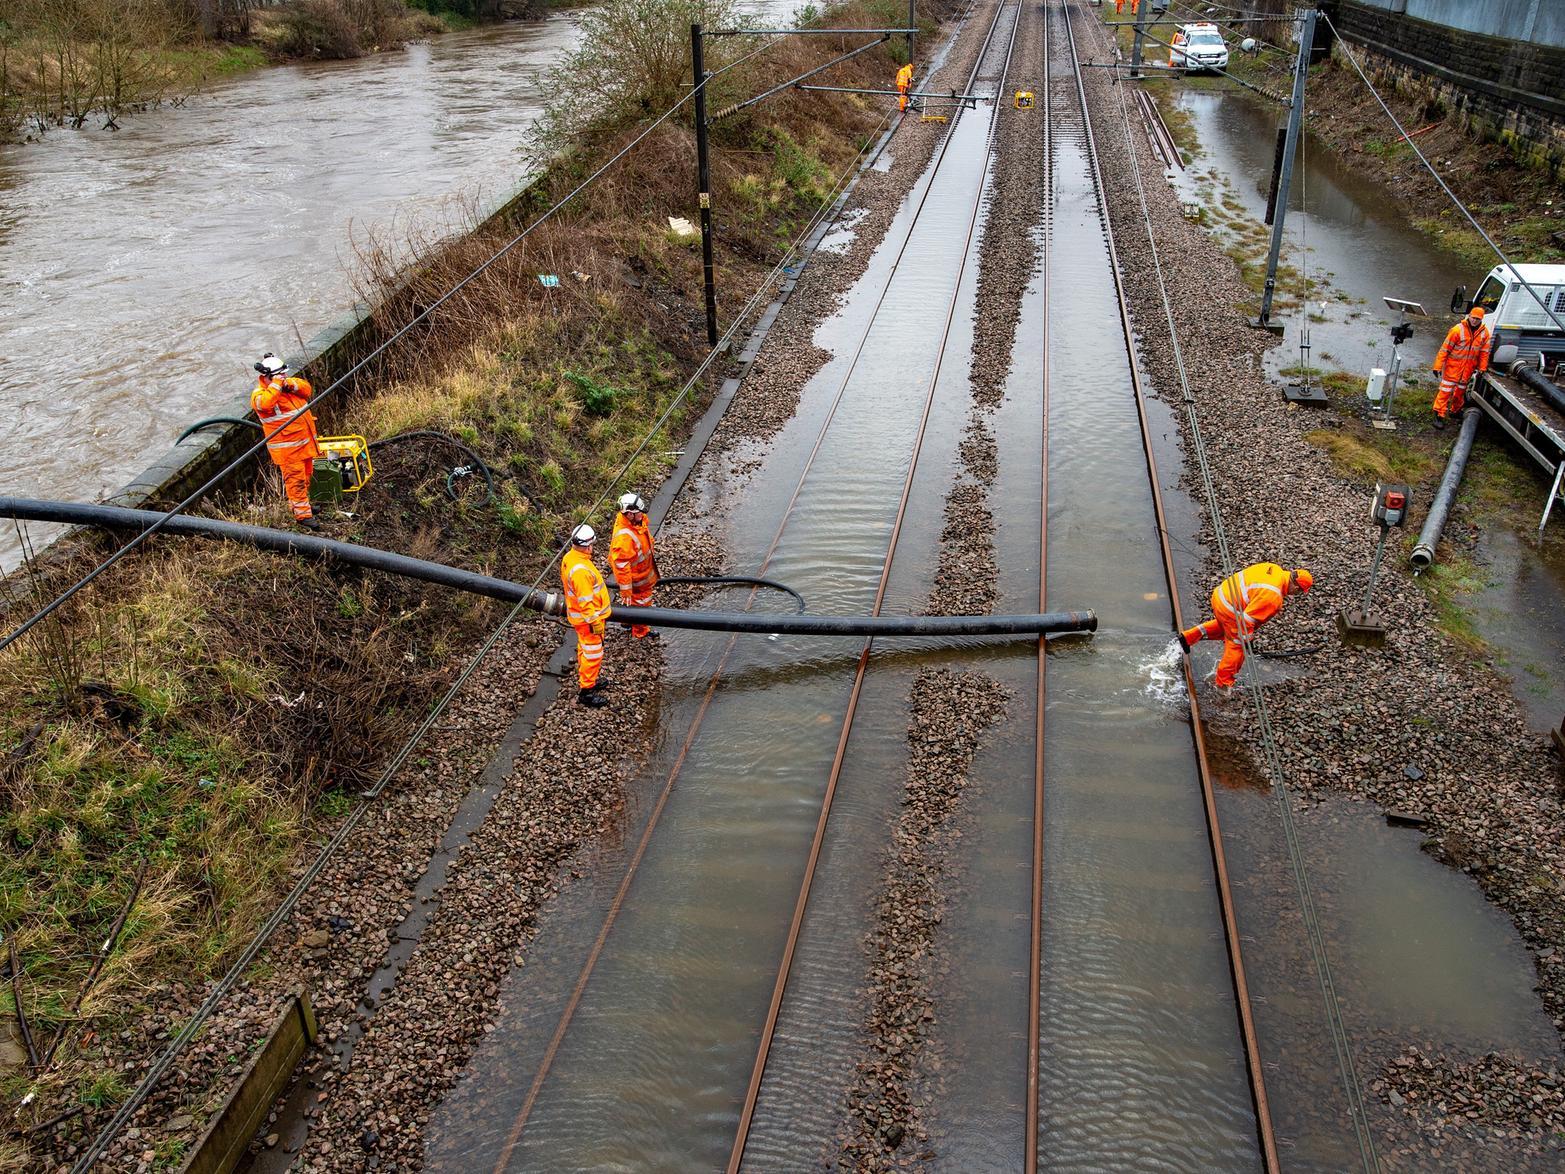 Network Rail engineers work to clear the floodwater from the tracks at Kirkstall Forge station.